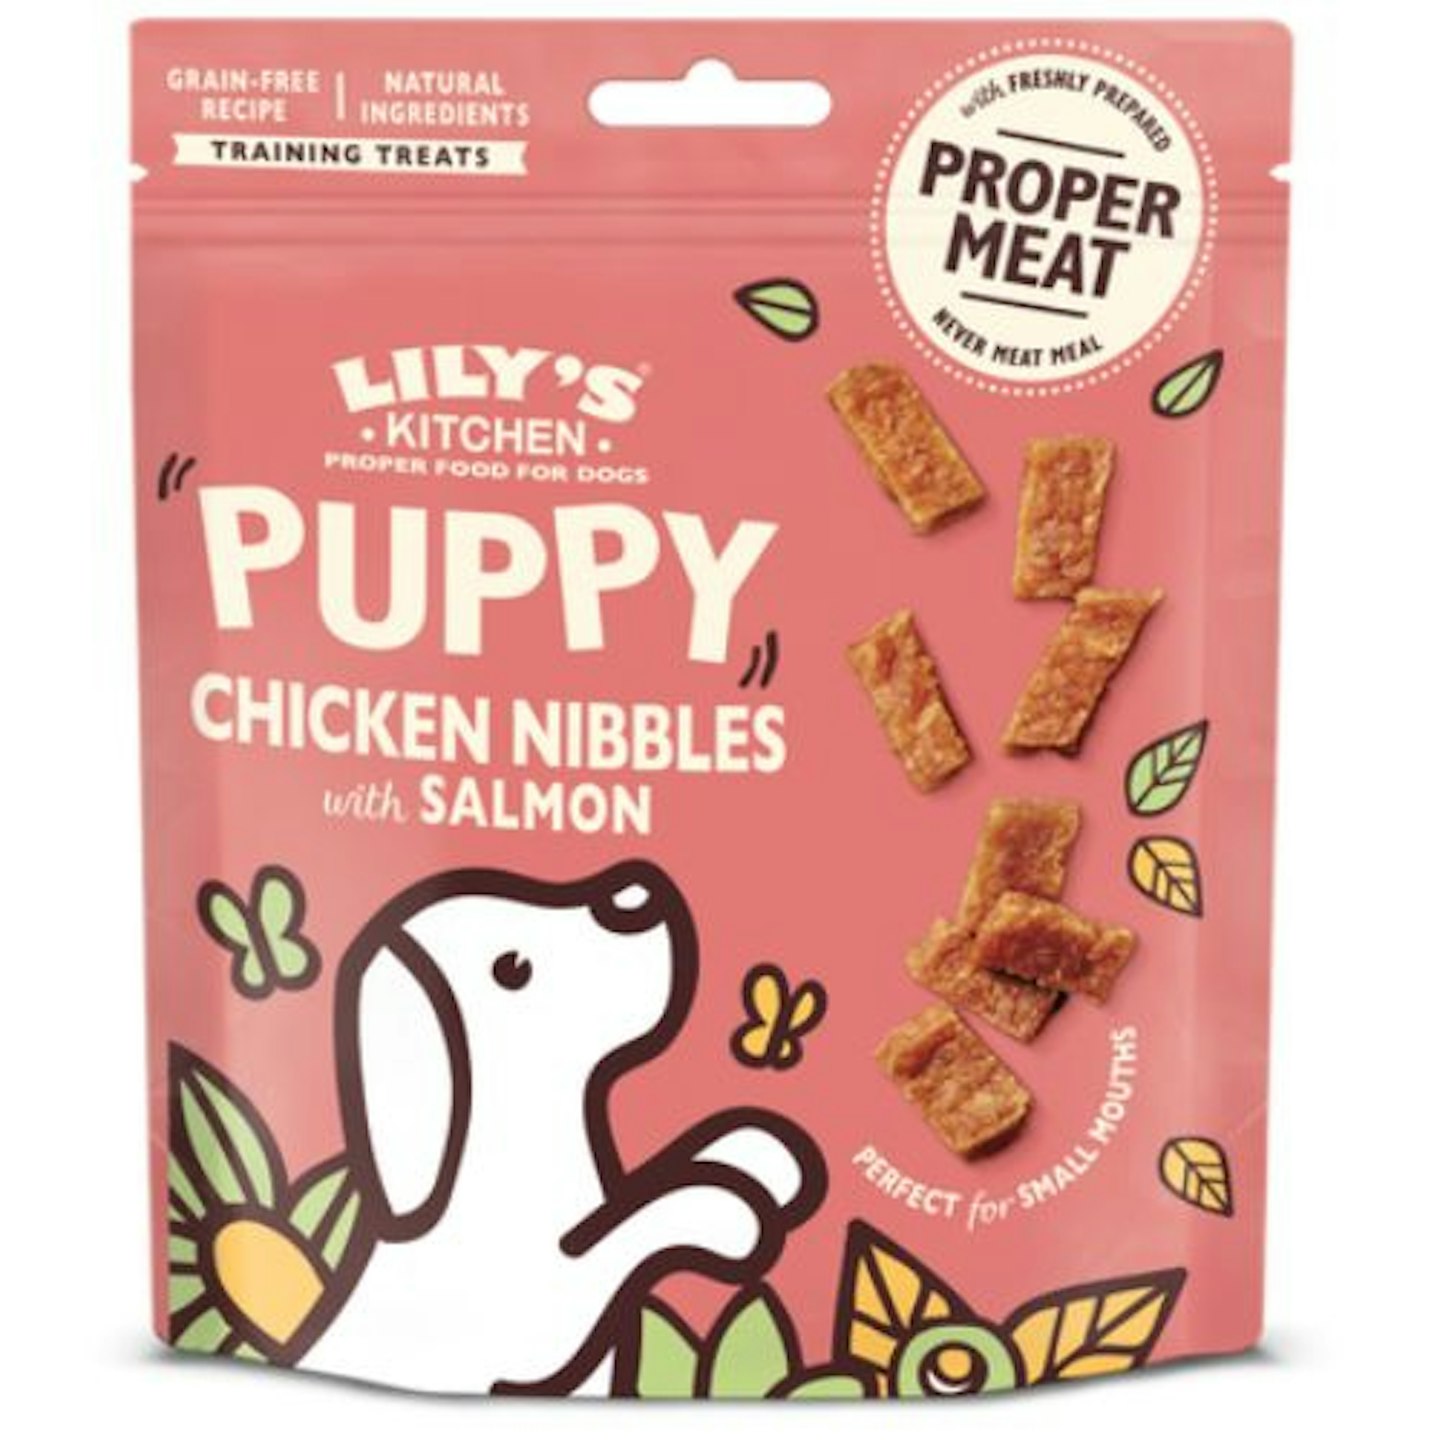 Lily's Kitchen Chicken Nibbles with Salmon Puppy Treats